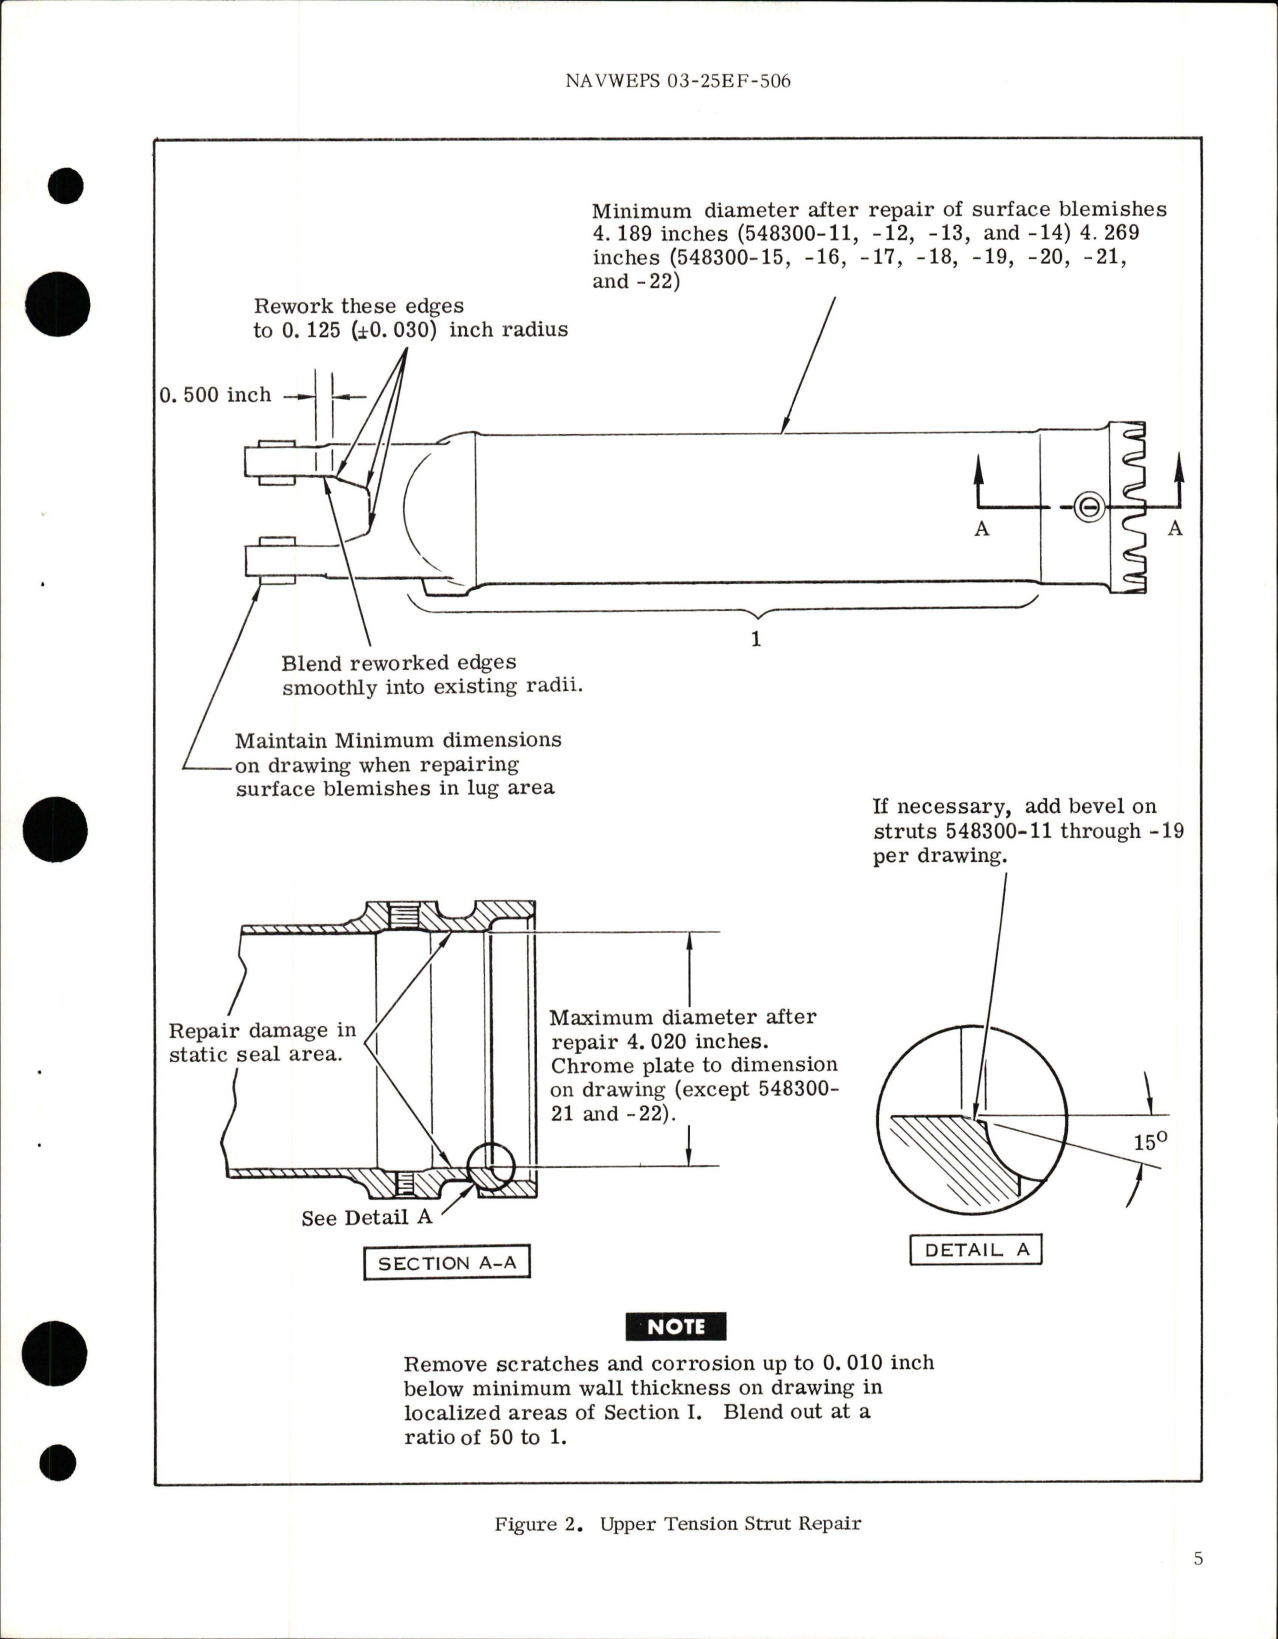 Sample page 7 from AirCorps Library document: Overhaul Instructions with Parts Breakdown for Main Gear Pneudraulic Tension Strut Assembly